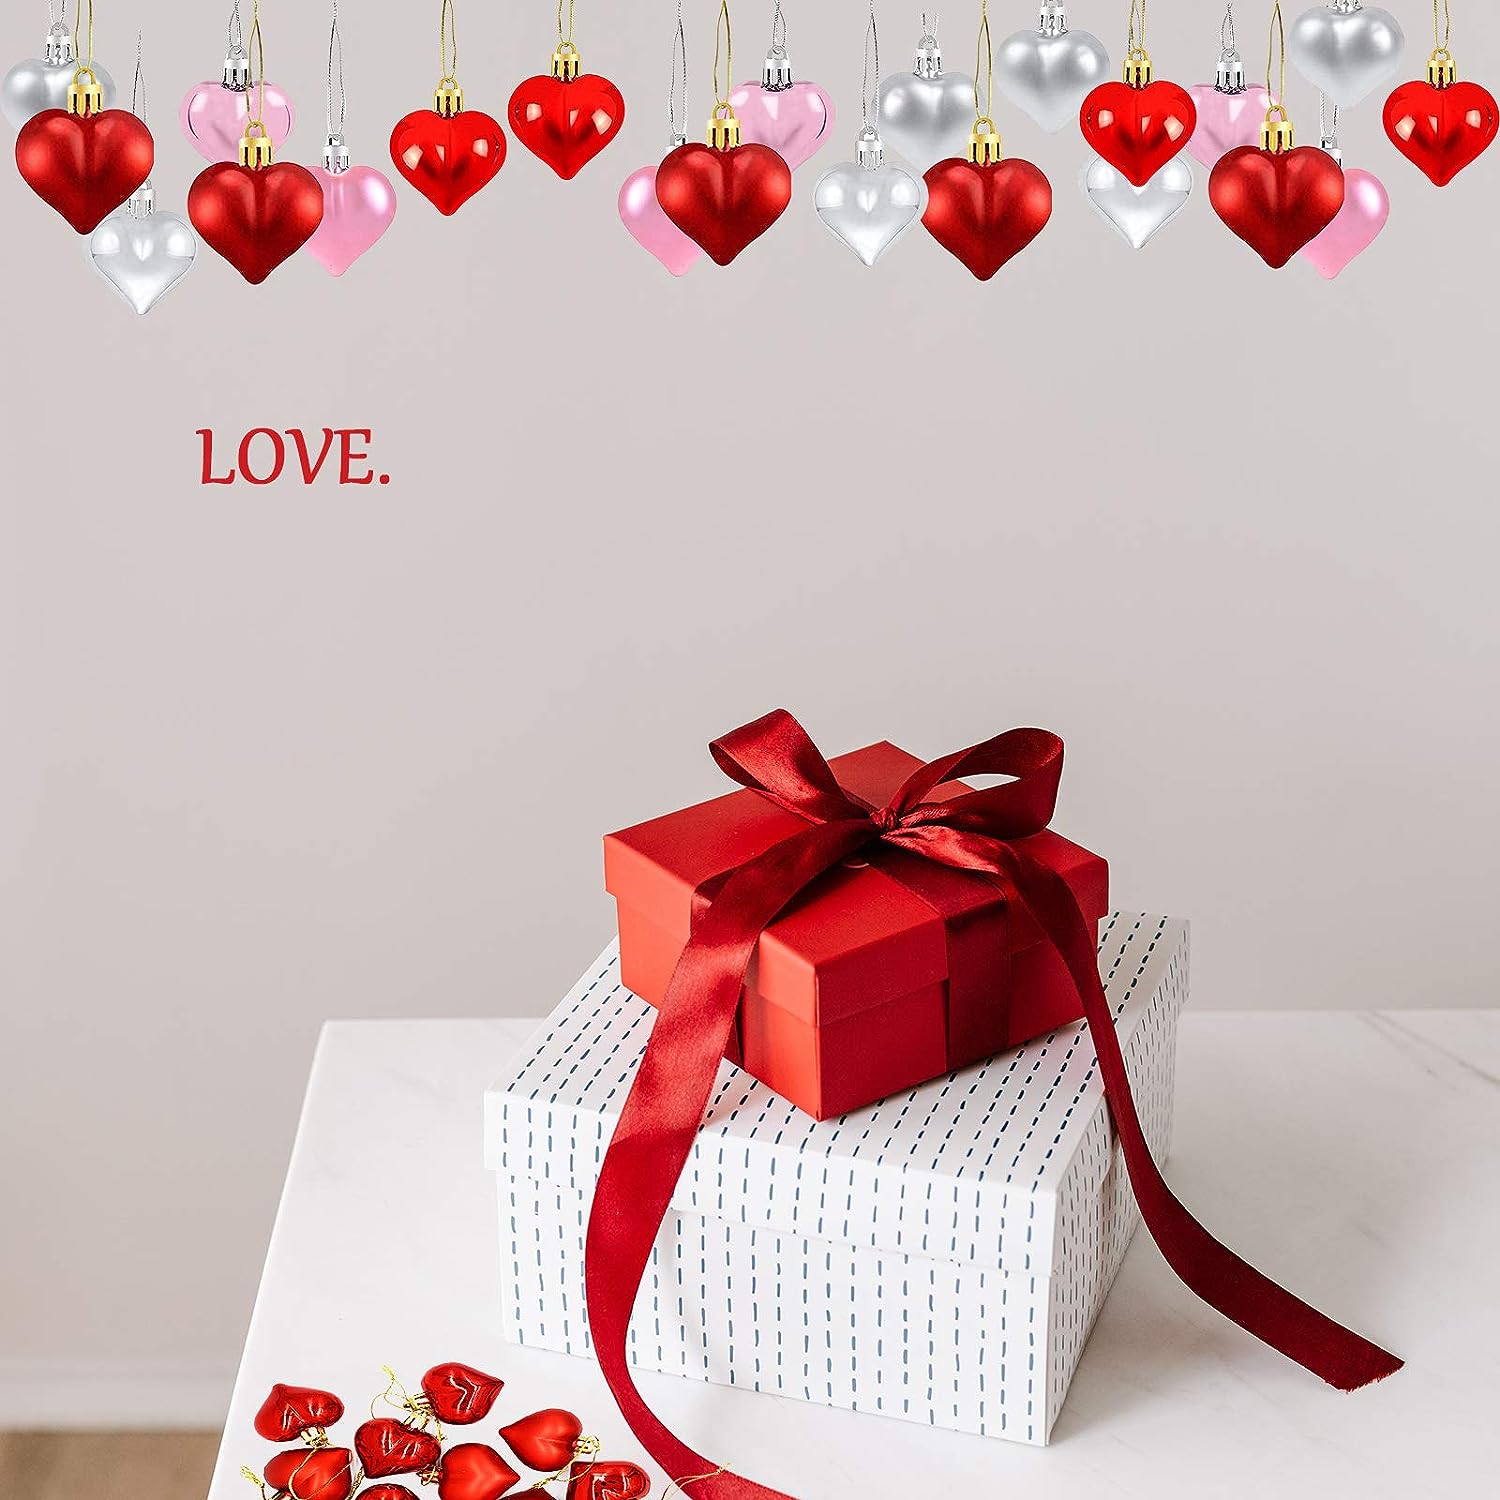 Valentine's Day Heart Shaped Ornaments, 24 Pcs Valentines Heart Decorations, Romantic Valentine's Day Hanging Decorations, Red Pink Silver Heart